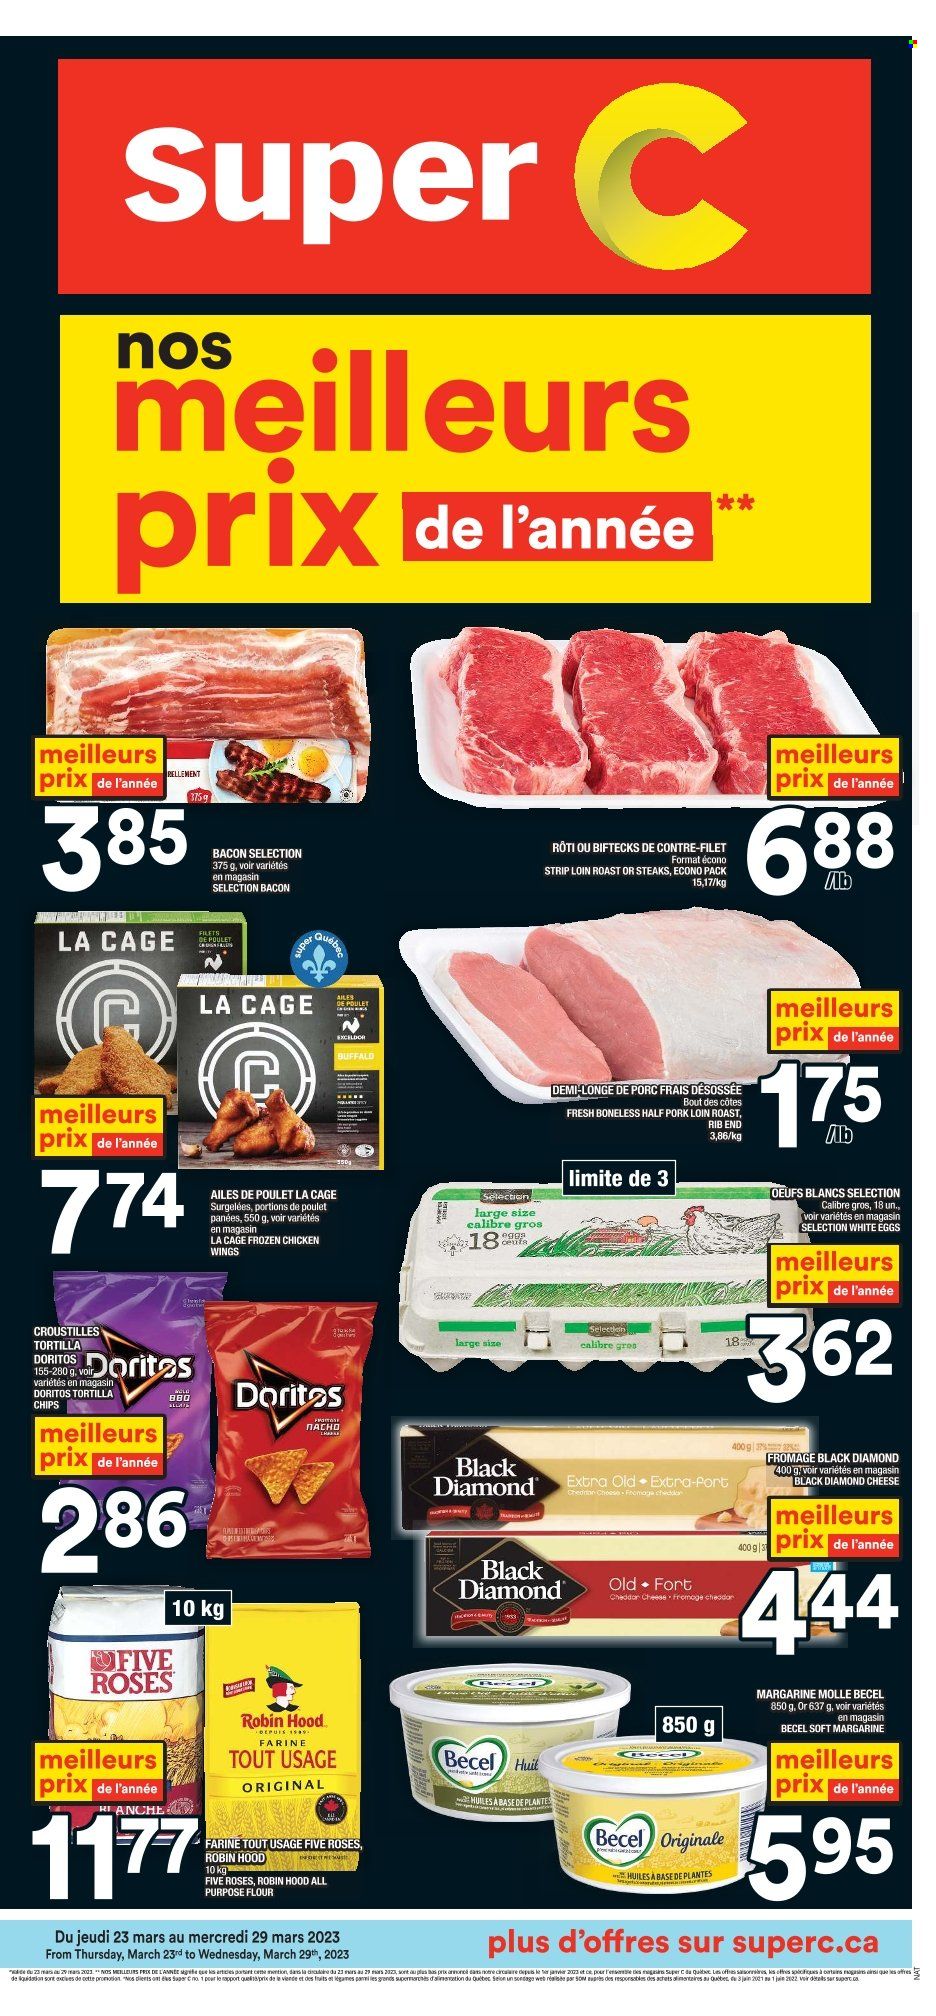 thumbnail - Super C Flyer - March 23, 2023 - March 29, 2023 - Sales products - roast, bacon, cheese, eggs, margarine, chicken wings, Mars, Doritos, tortilla chips, all purpose flour, chicken, steak, pork loin, pork meat. Page 1.